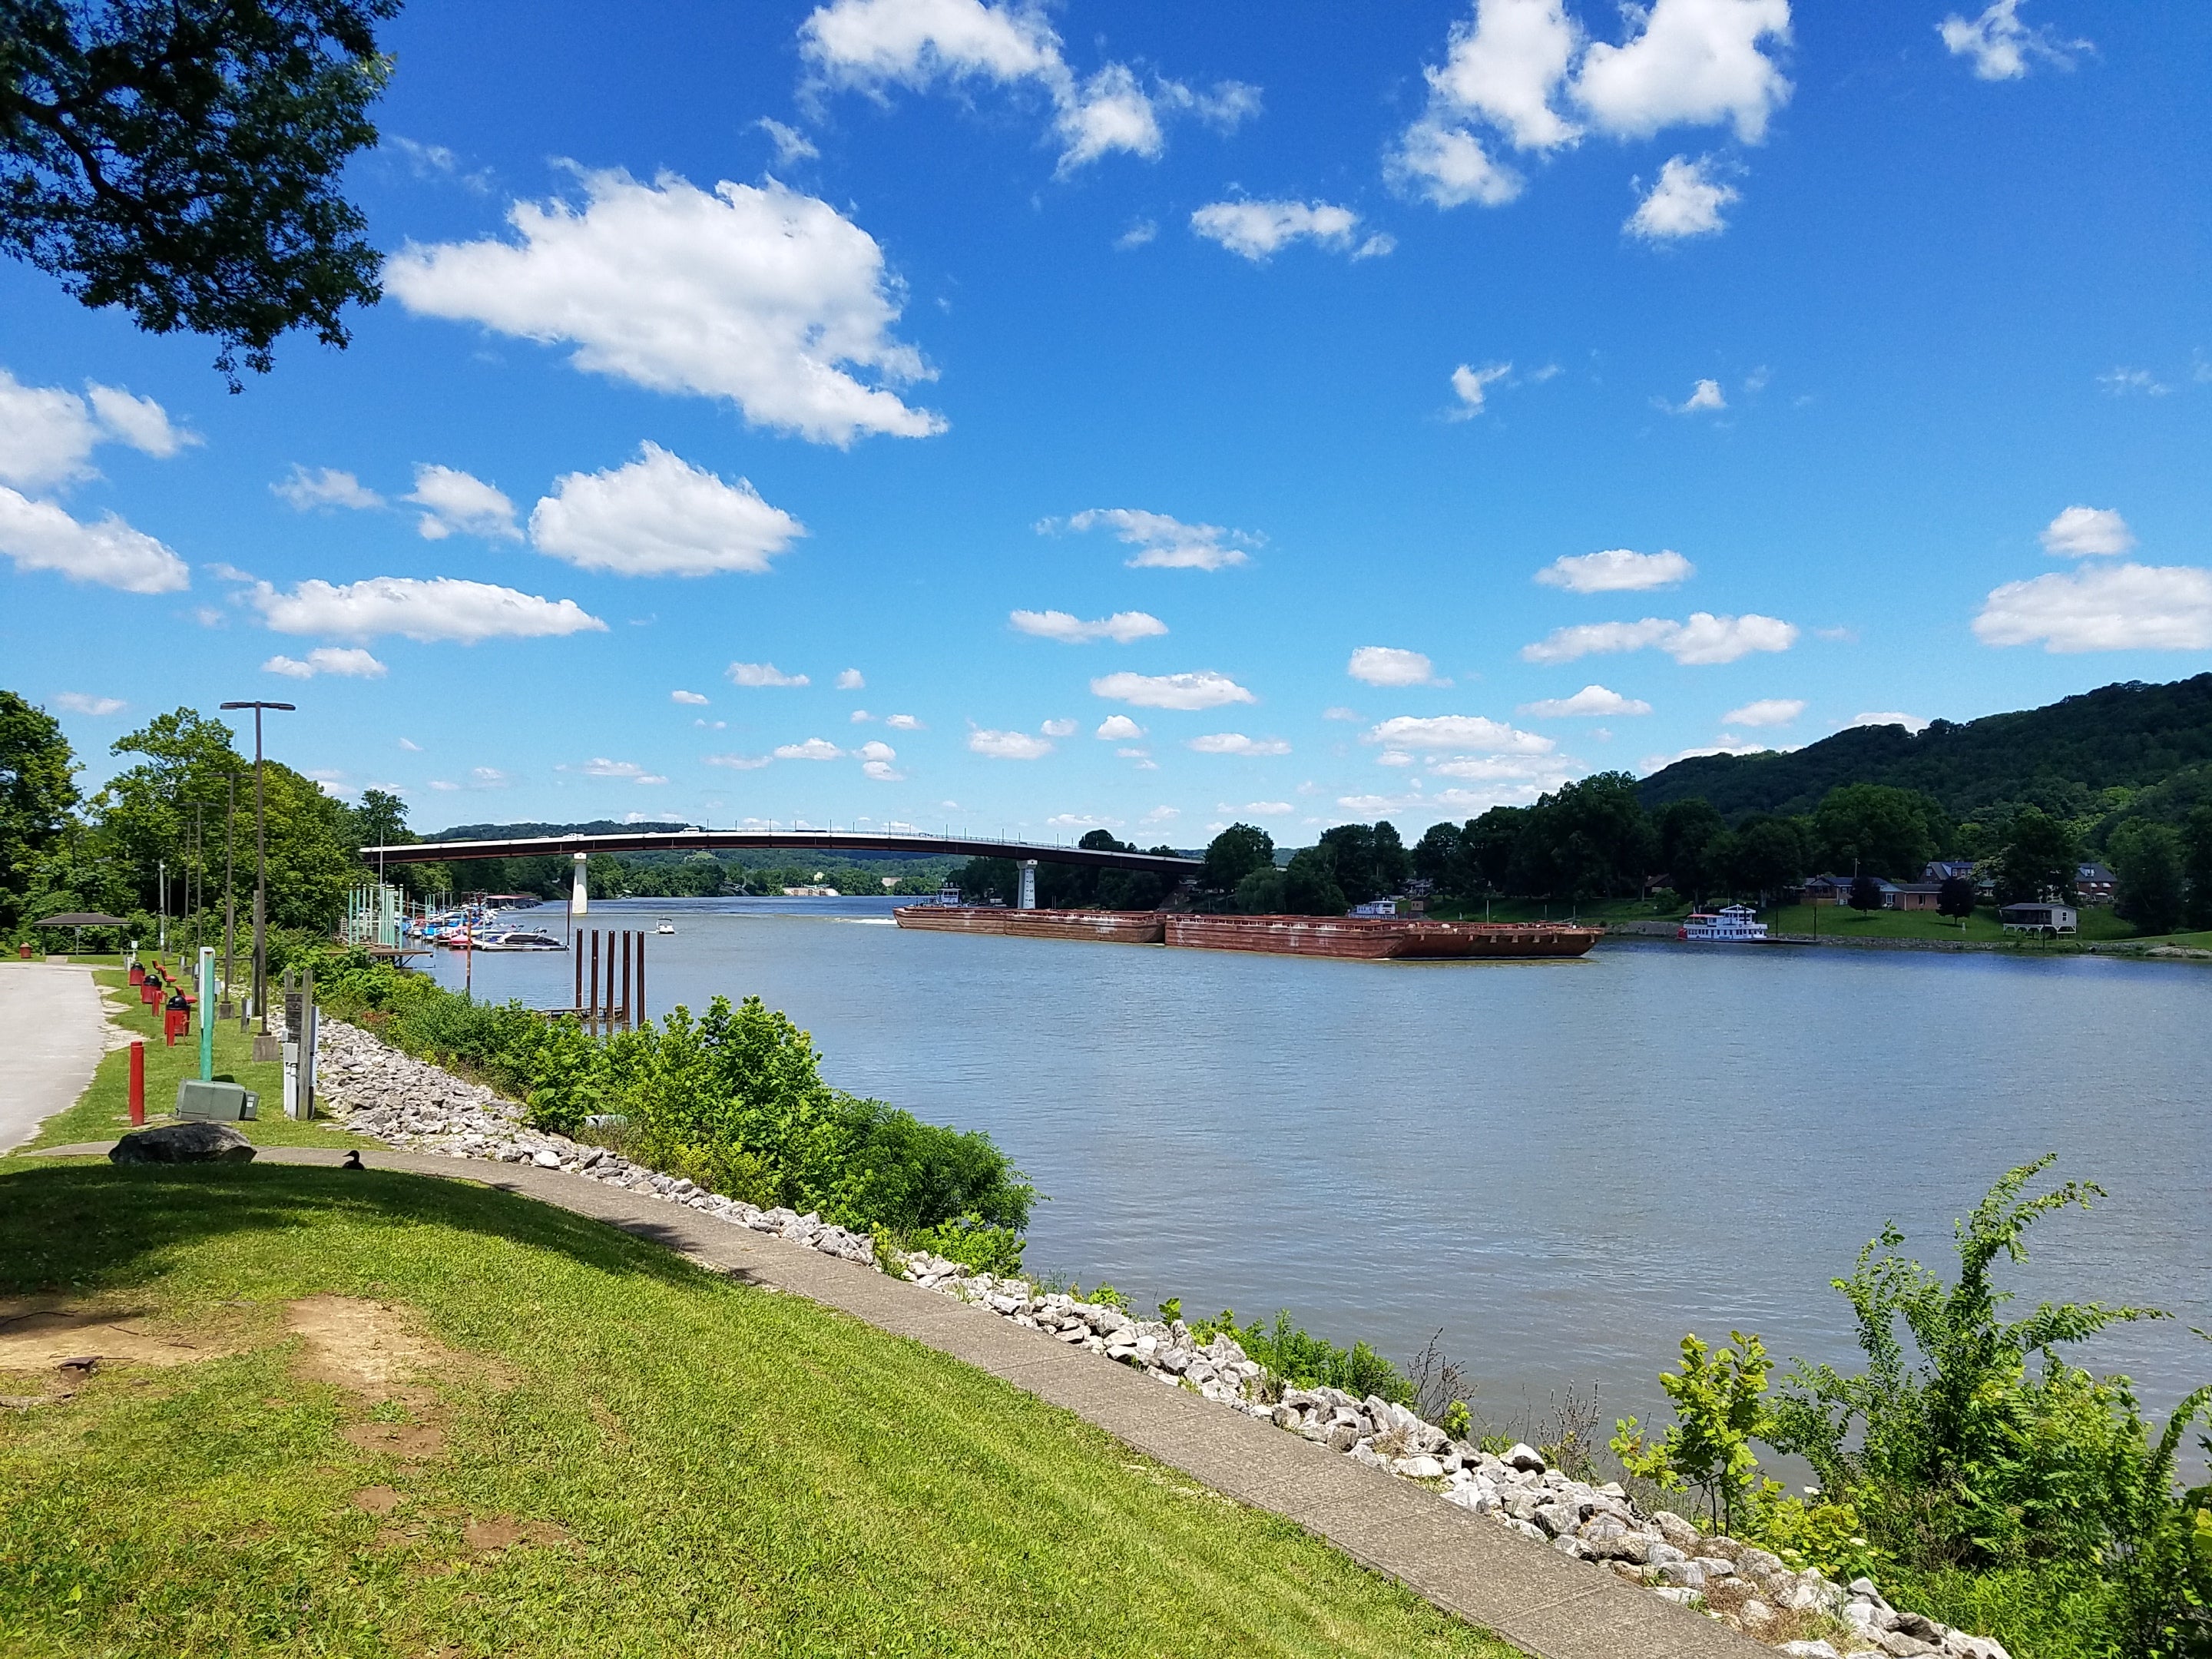 Coal barges traveling down the Kanawha River next to the St. Albans Roadside Park